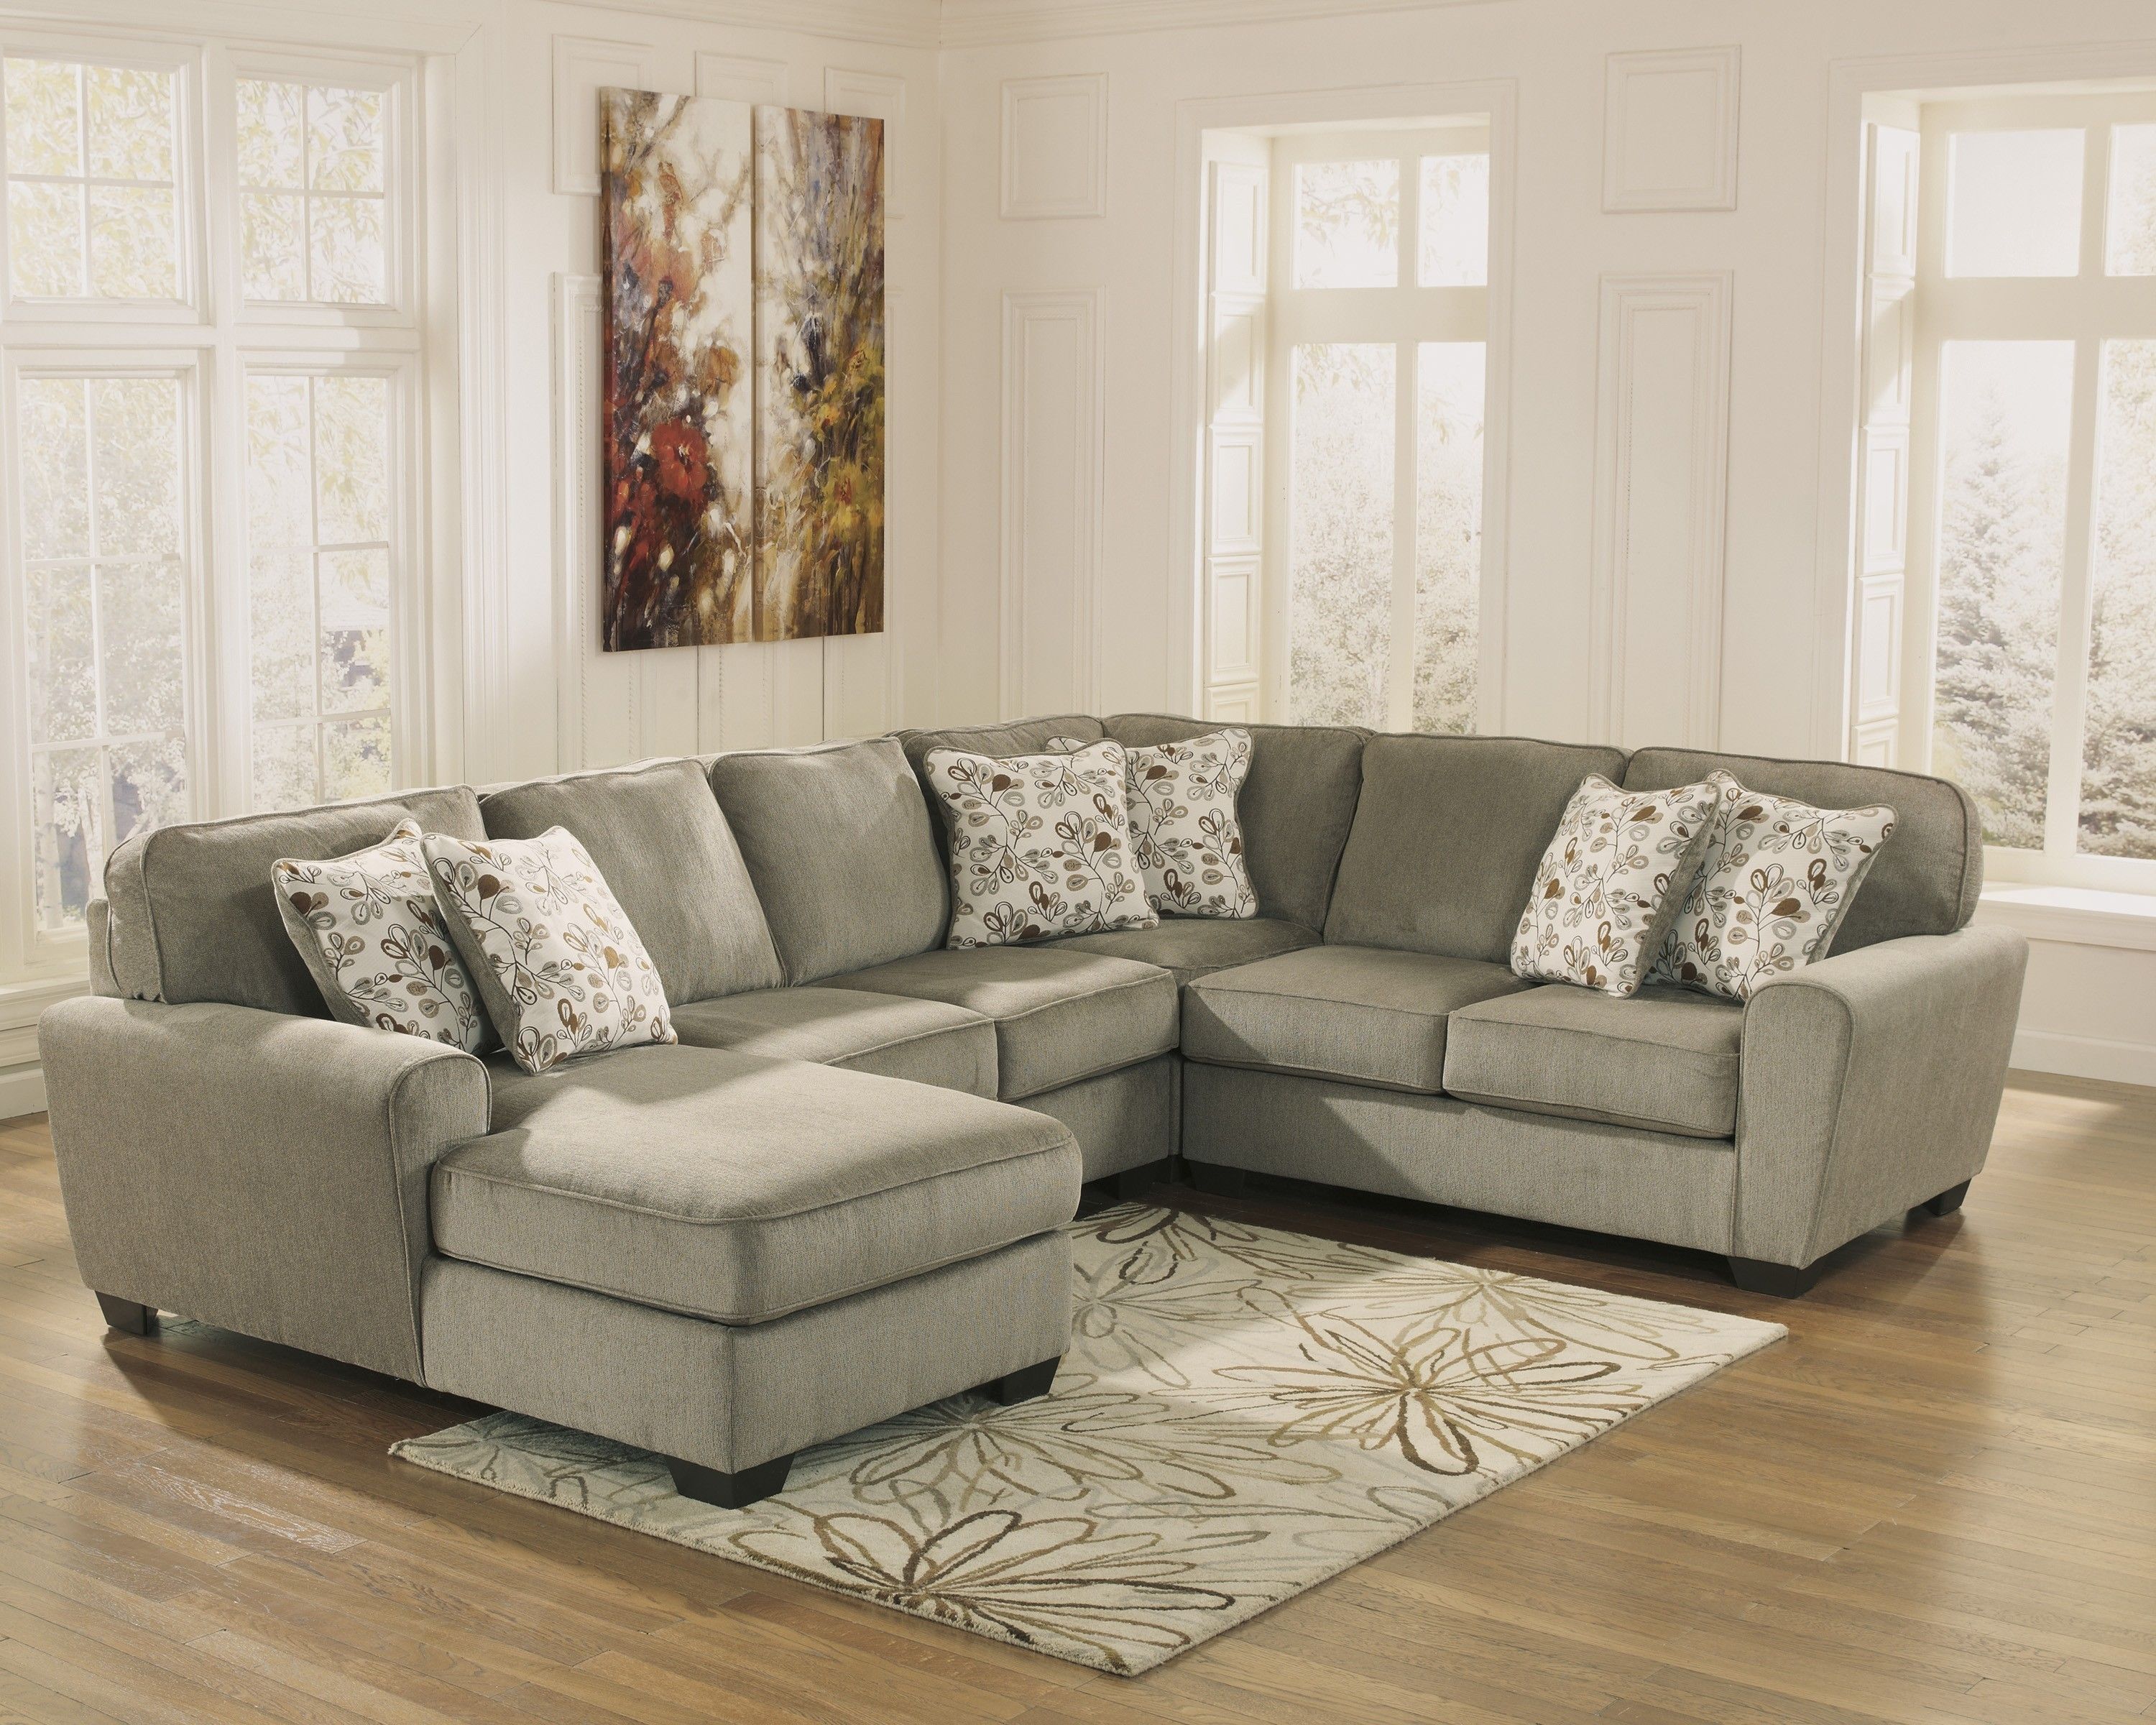 Patola Park Patina 4 Piece Sectional Set With Left Arm Facing Chaise Within Elk Grove Ca Sectional Sofas (Photo 8 of 10)